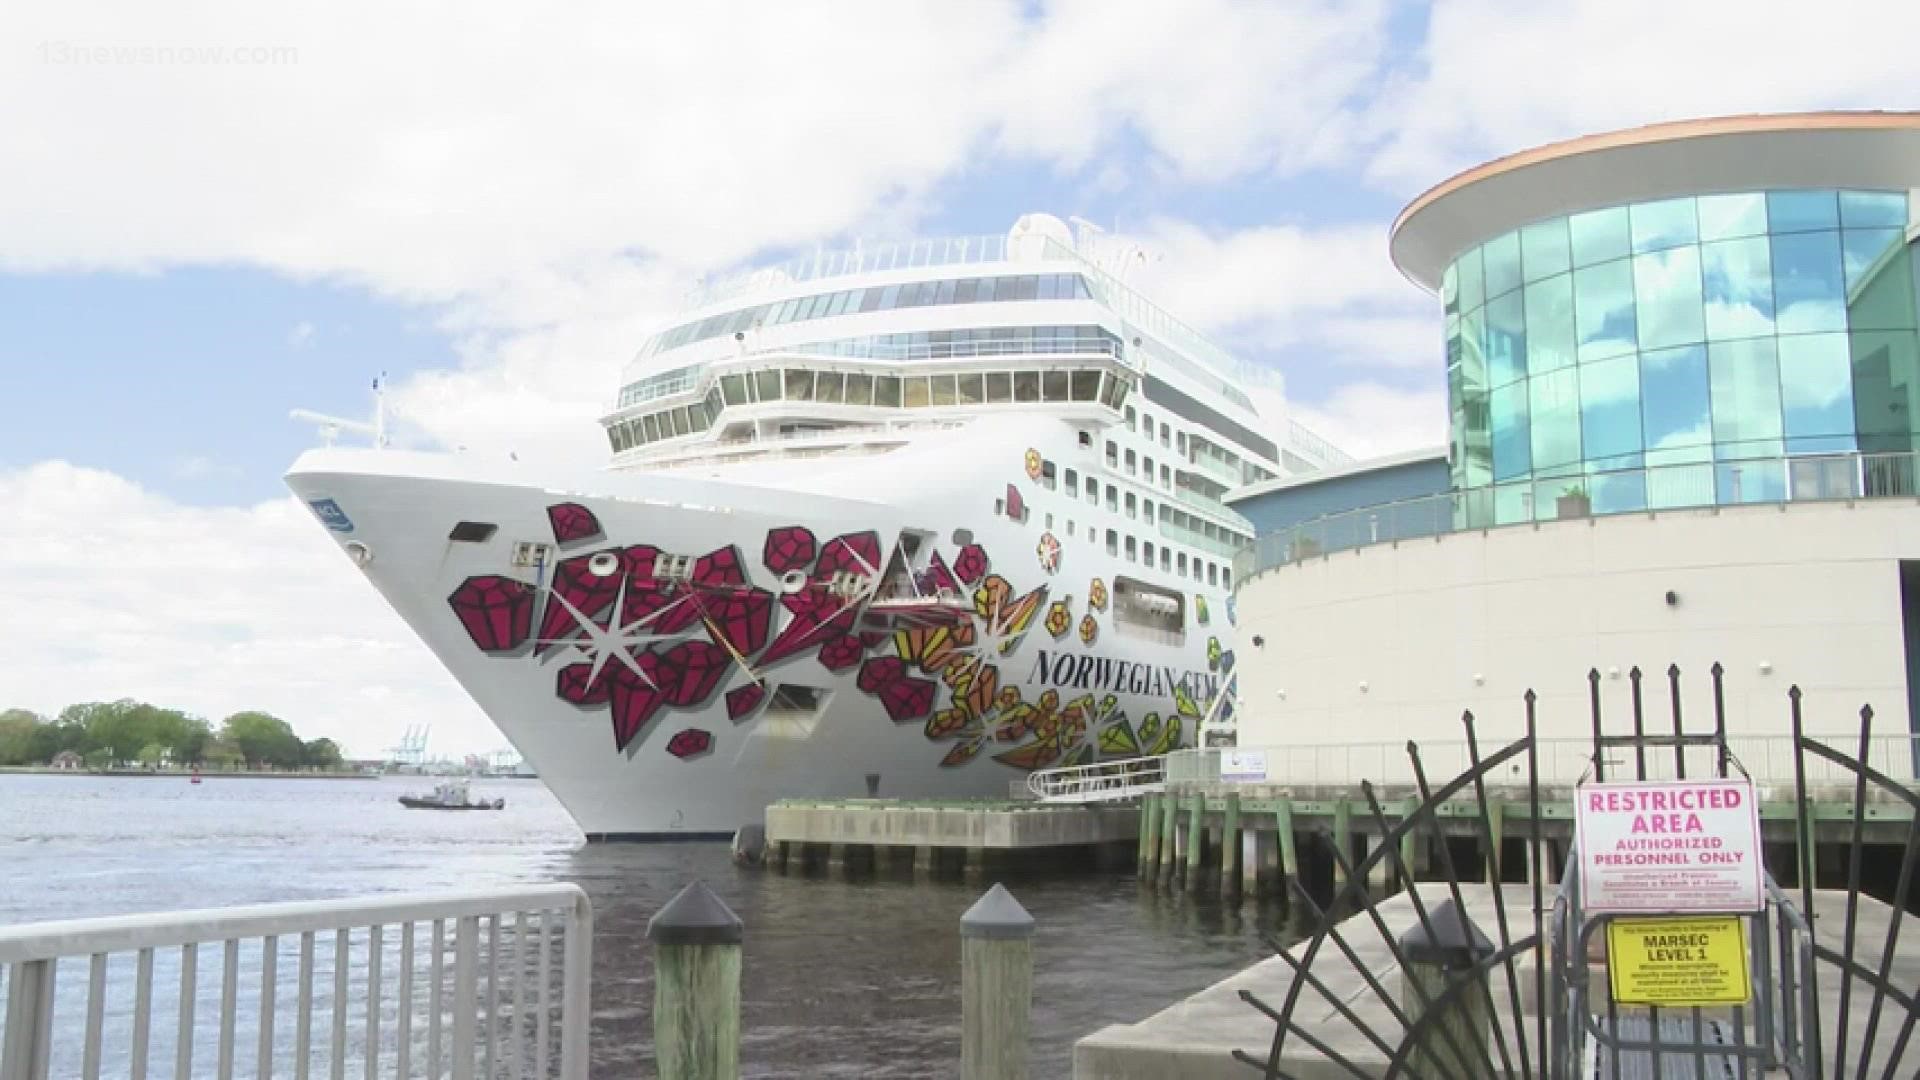 Sunday afternoon, the Norwegian Gem pulled into port. Monday morning, Norfolk will welcome the Norwegian Getaway.